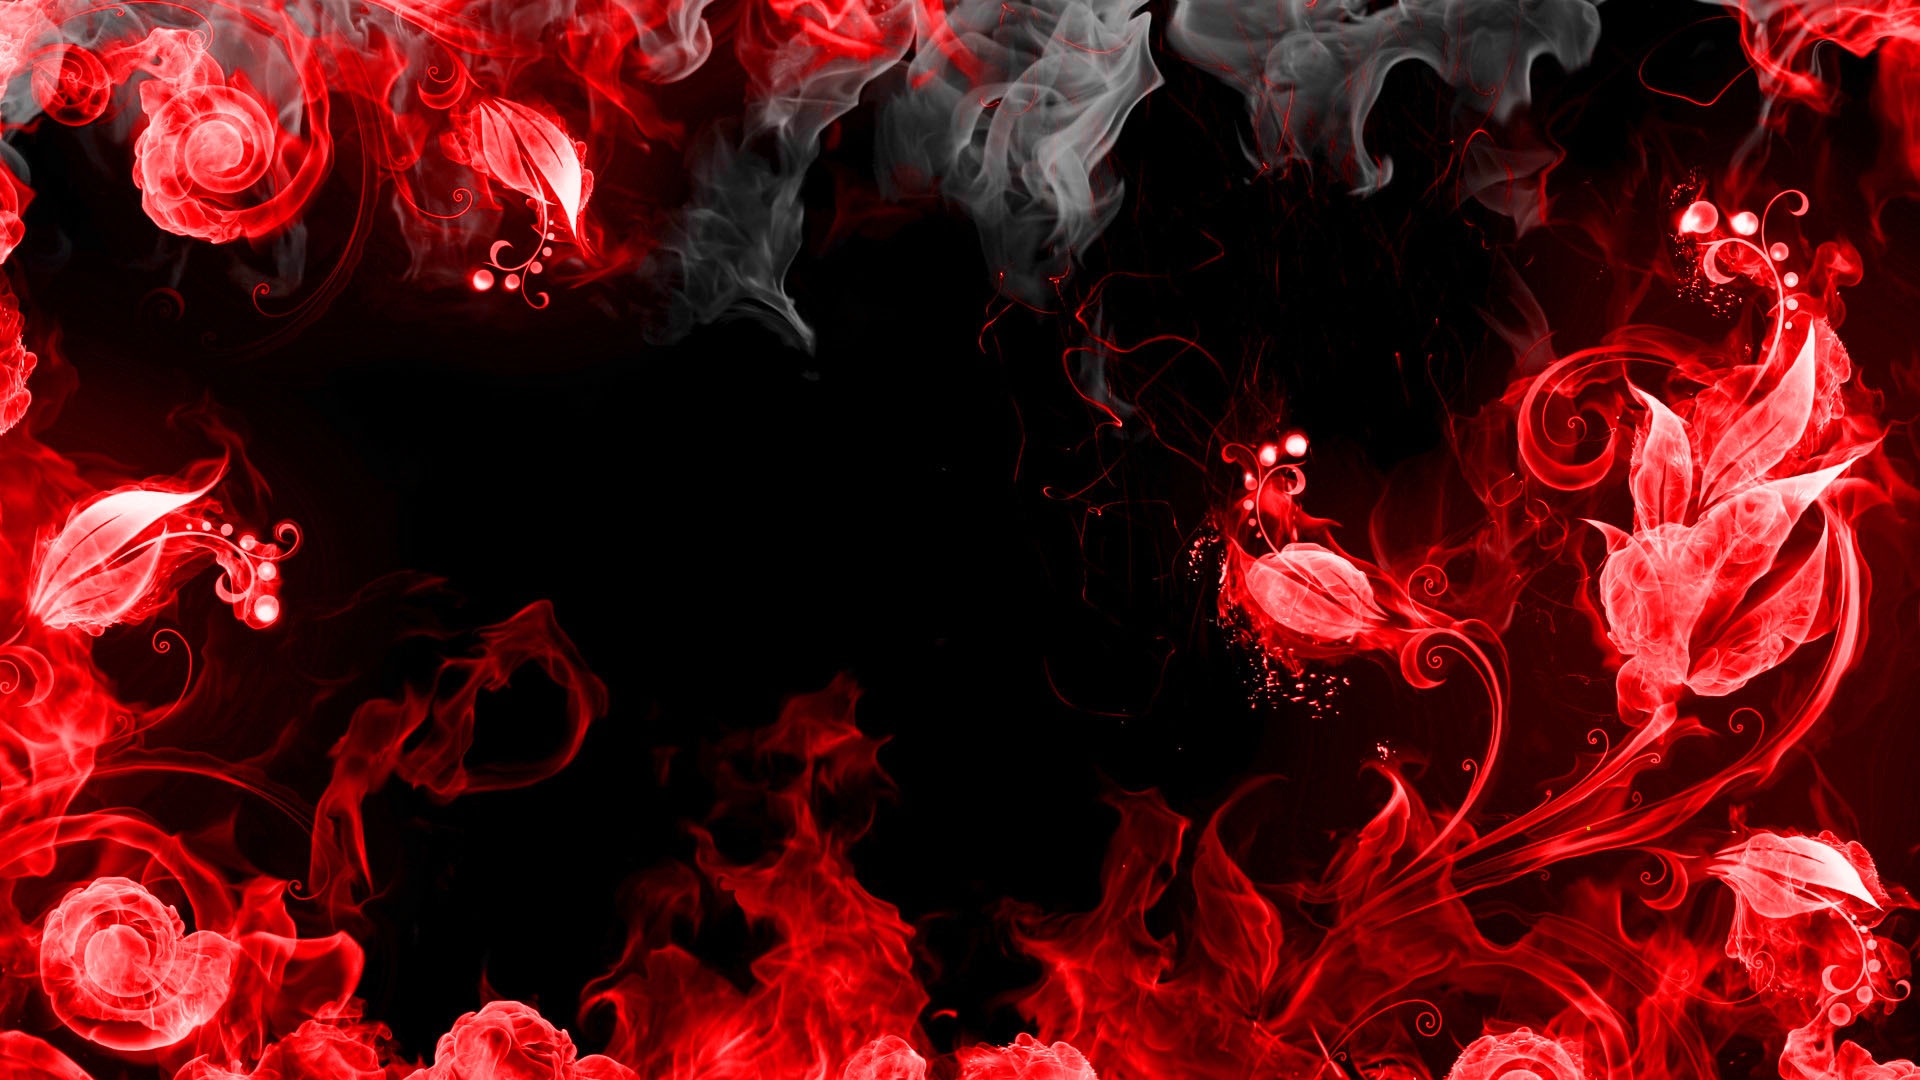 Download Wallpaper 1920x1080 abstraction red smoke black Full HD 1920x1080